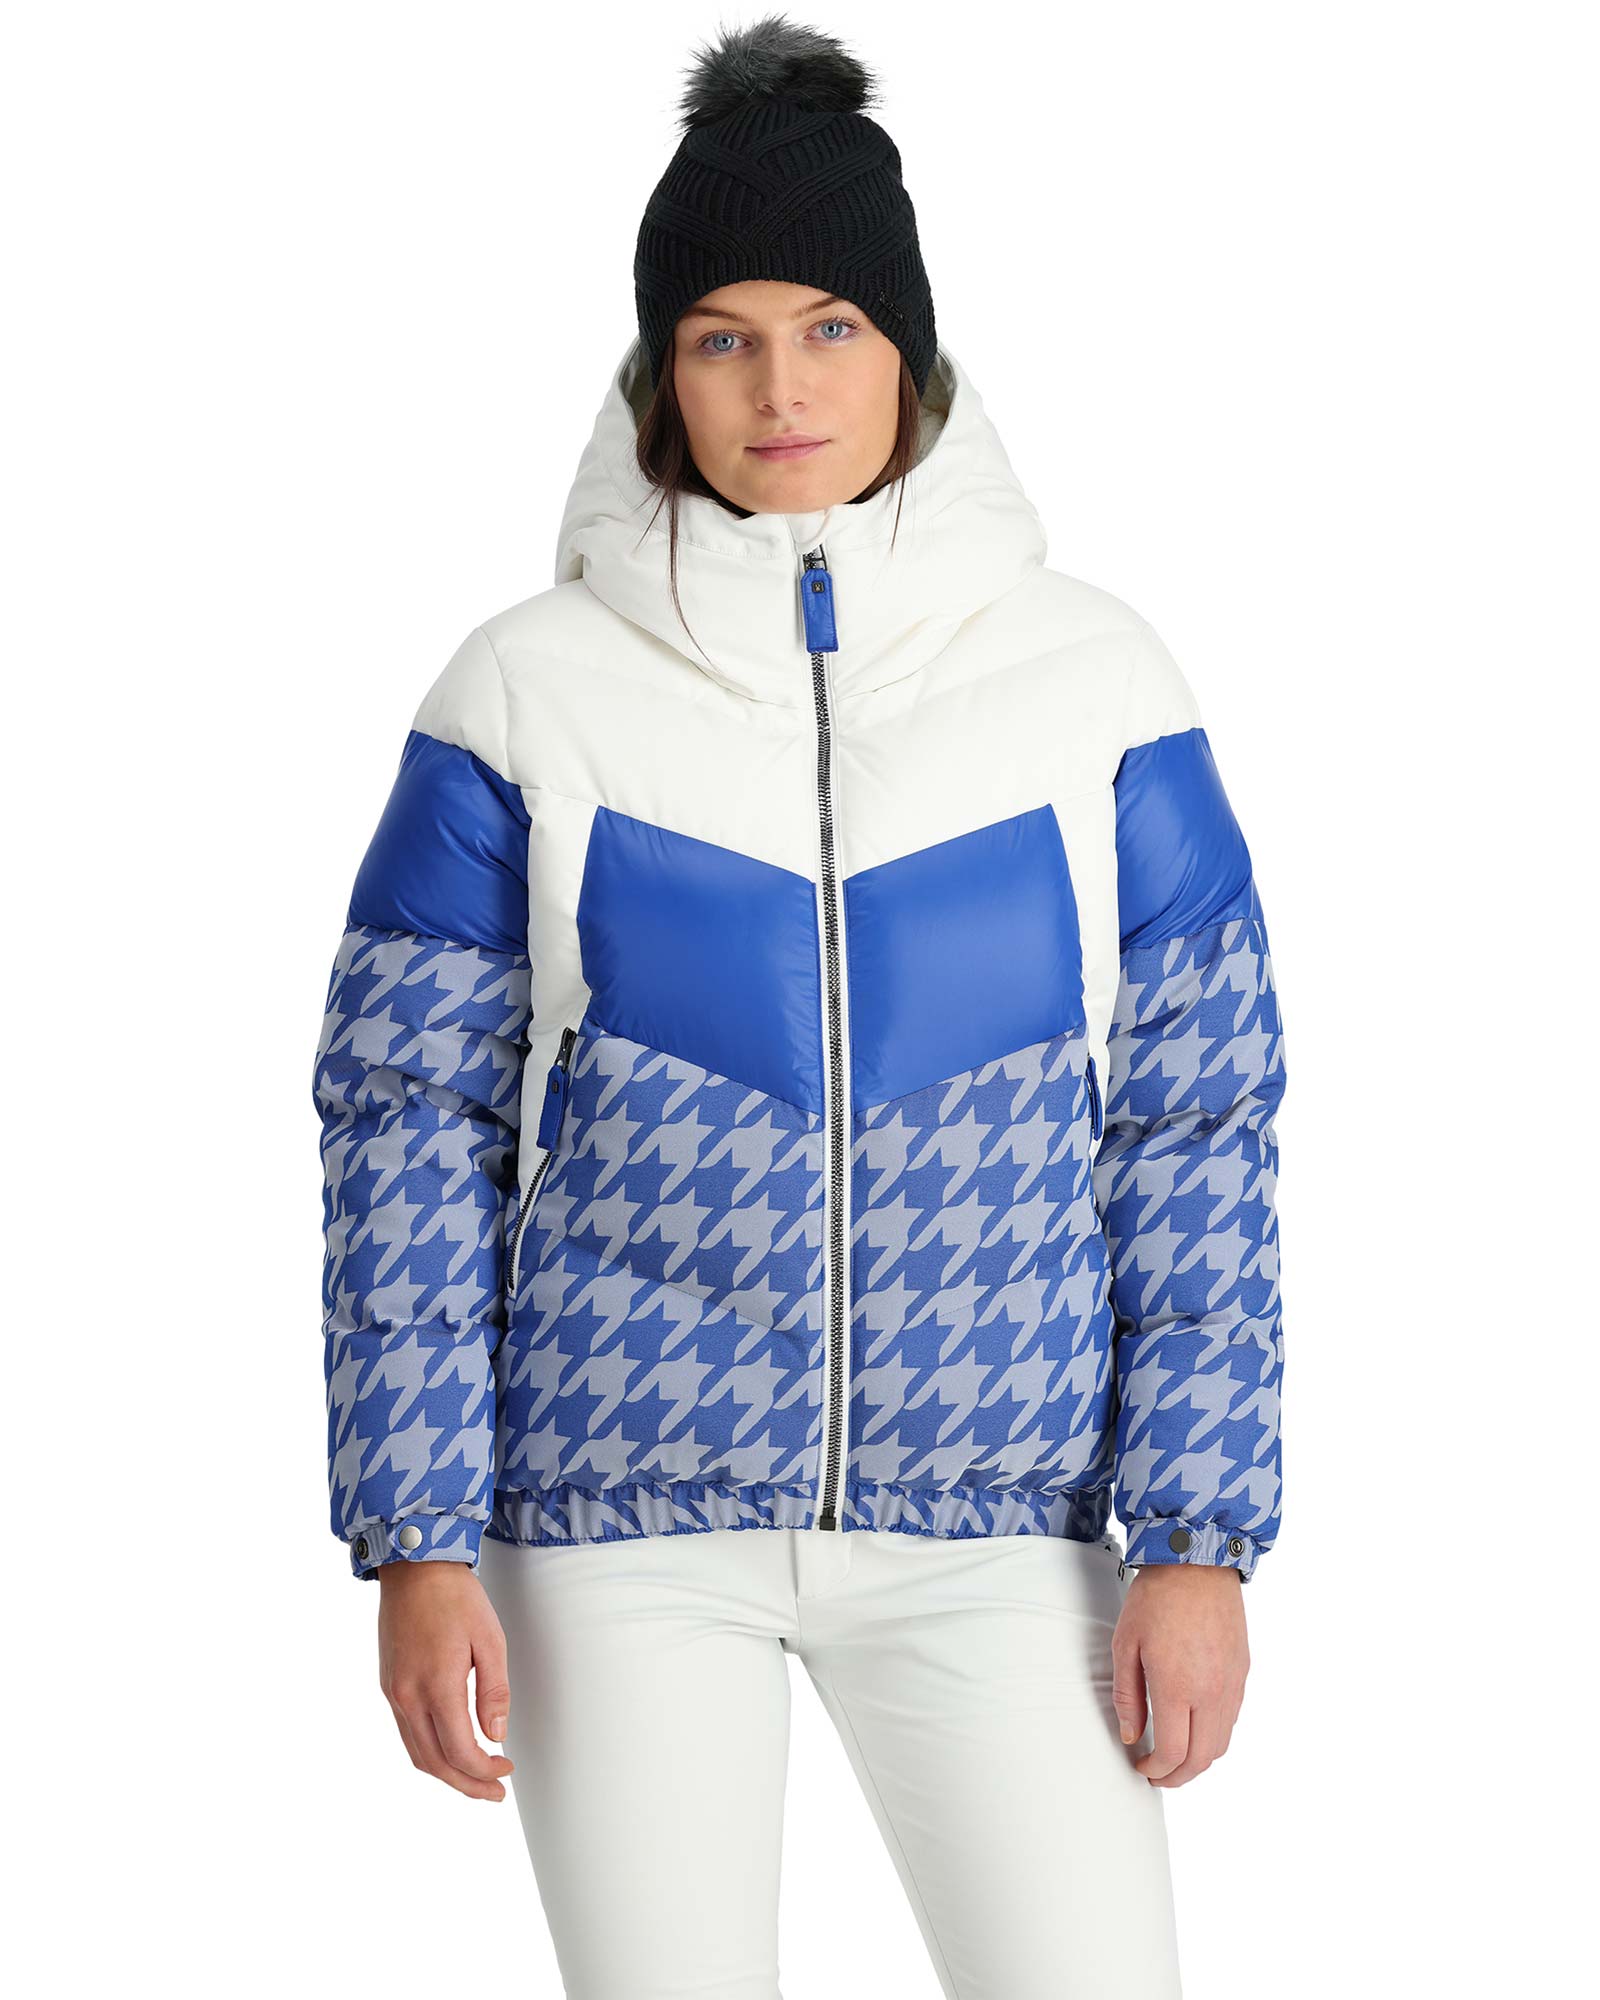 Spyder Women’s Eastwood Down Jacket - Electric Blue Houndstooth Print S